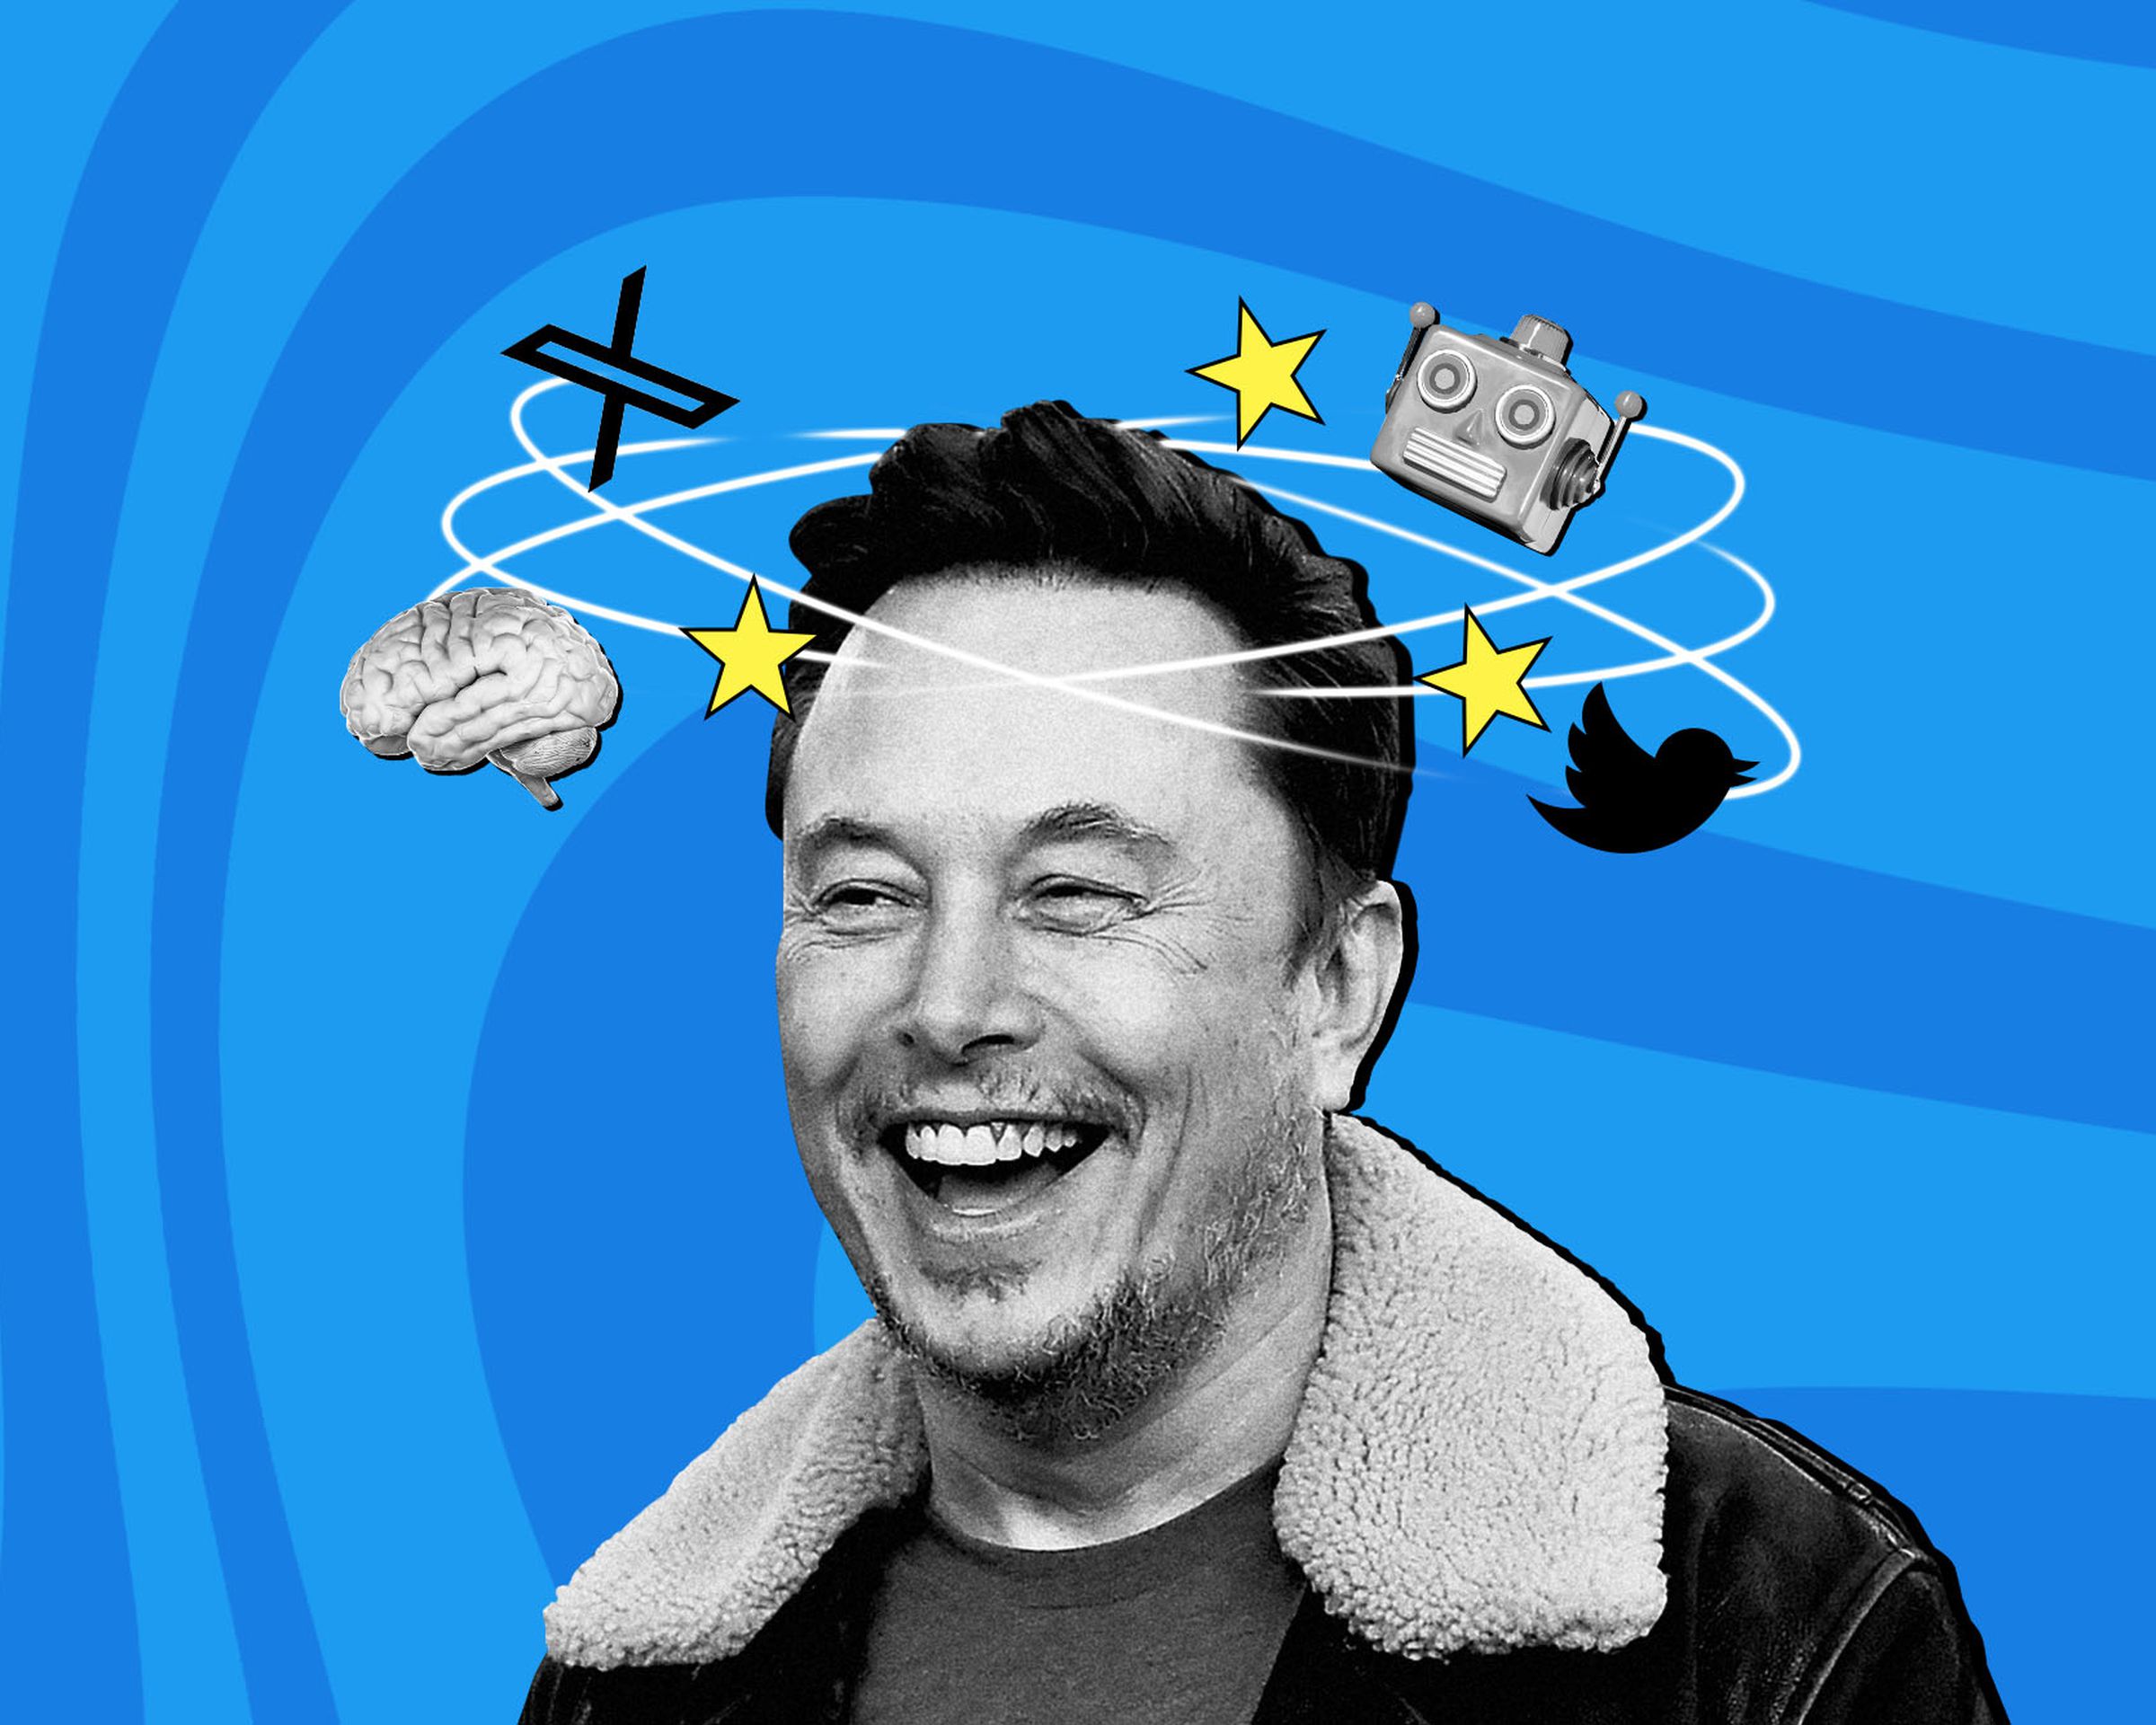 Photo illustration of Elon Musk with stars flying around his head in a cartoon-like fashion, as if he is dizzy.